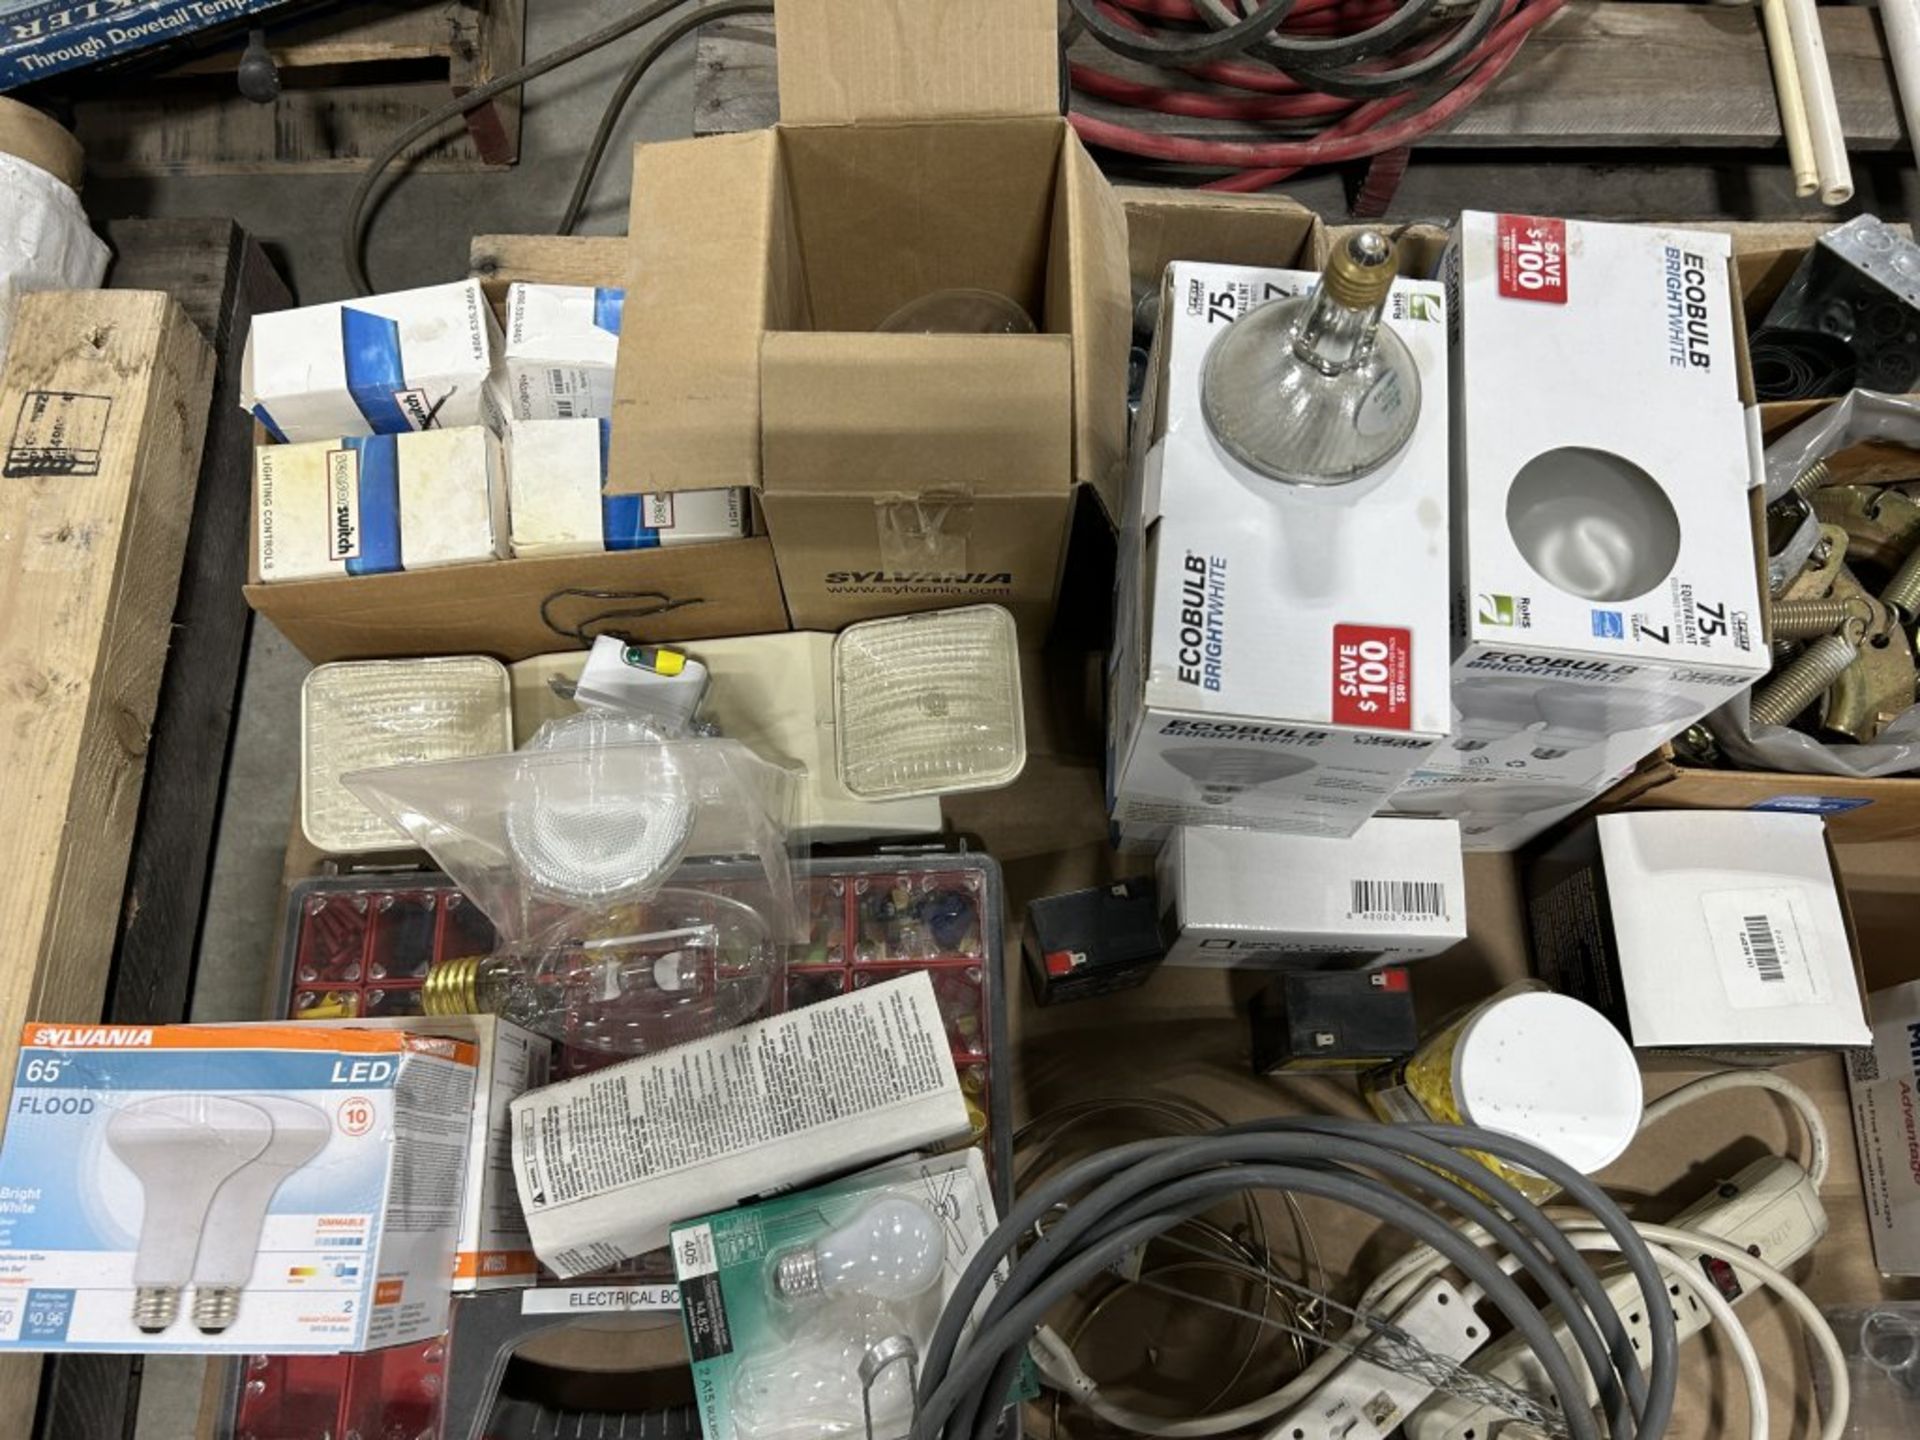 LARGE PALLET FULL OF ASSORTED FUSES, SWITCHES, OUTLETS, LIGHT BULBS, SPRINGS, ETC. - Image 5 of 7